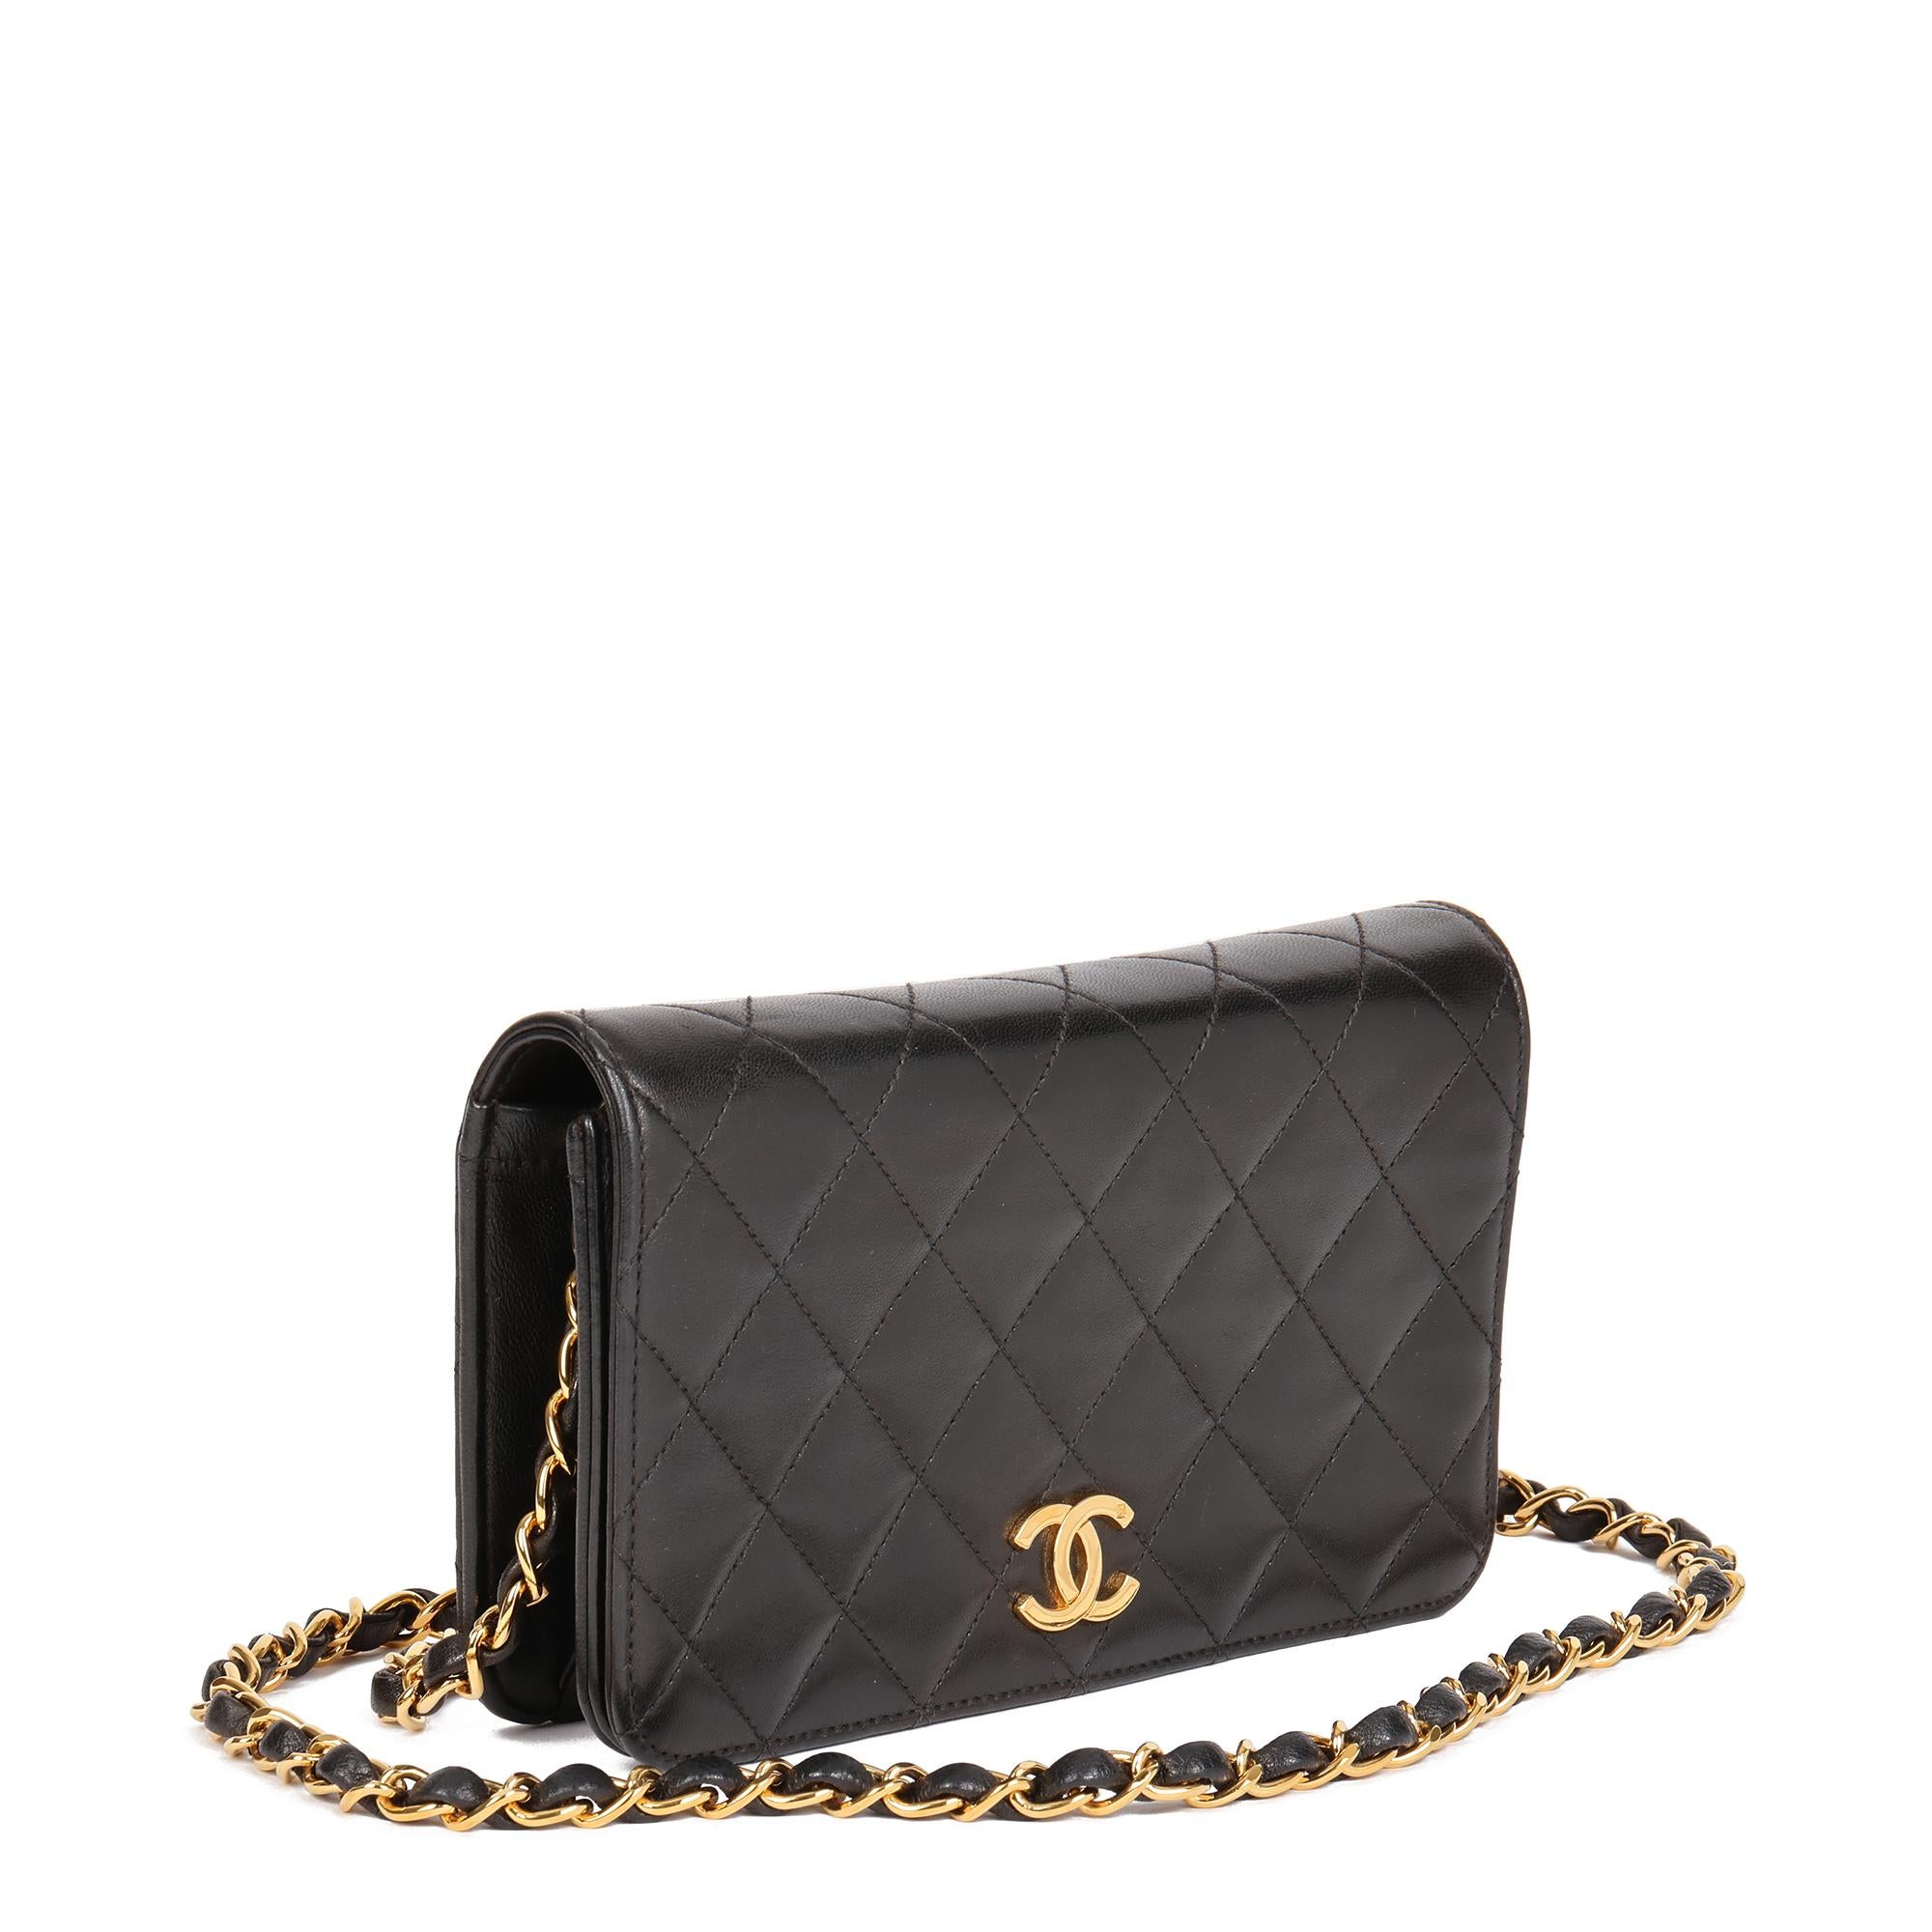 CHANEL
Black Quilted Lambskin Vintage Rectangular Mini Full Flap Bag 

Xupes Reference: HB4705
Serial Number: 5235567
Age (Circa): 2002
Accompanied By: Authenticity Card
Authenticity Details: Authenticity Card, Serial Sticker (Made in